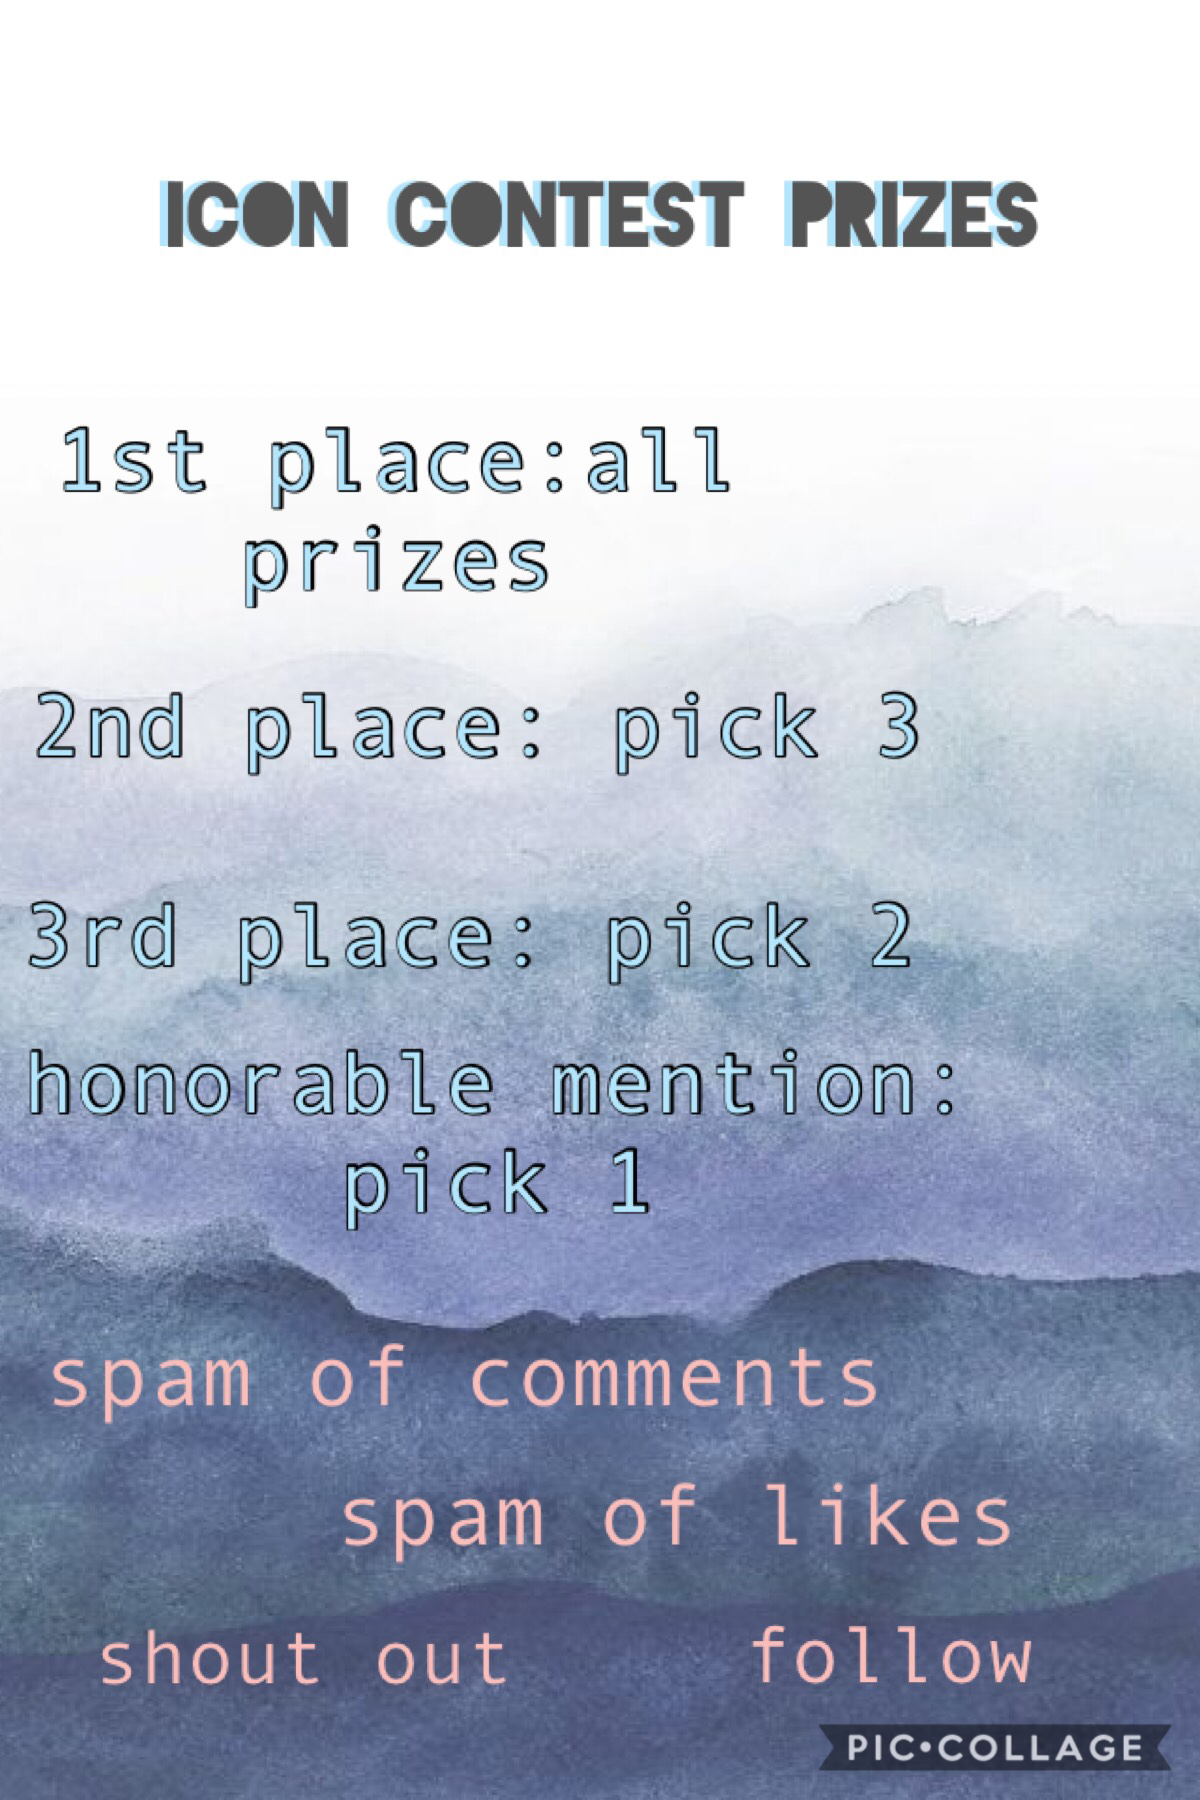 prizes for the icon contest